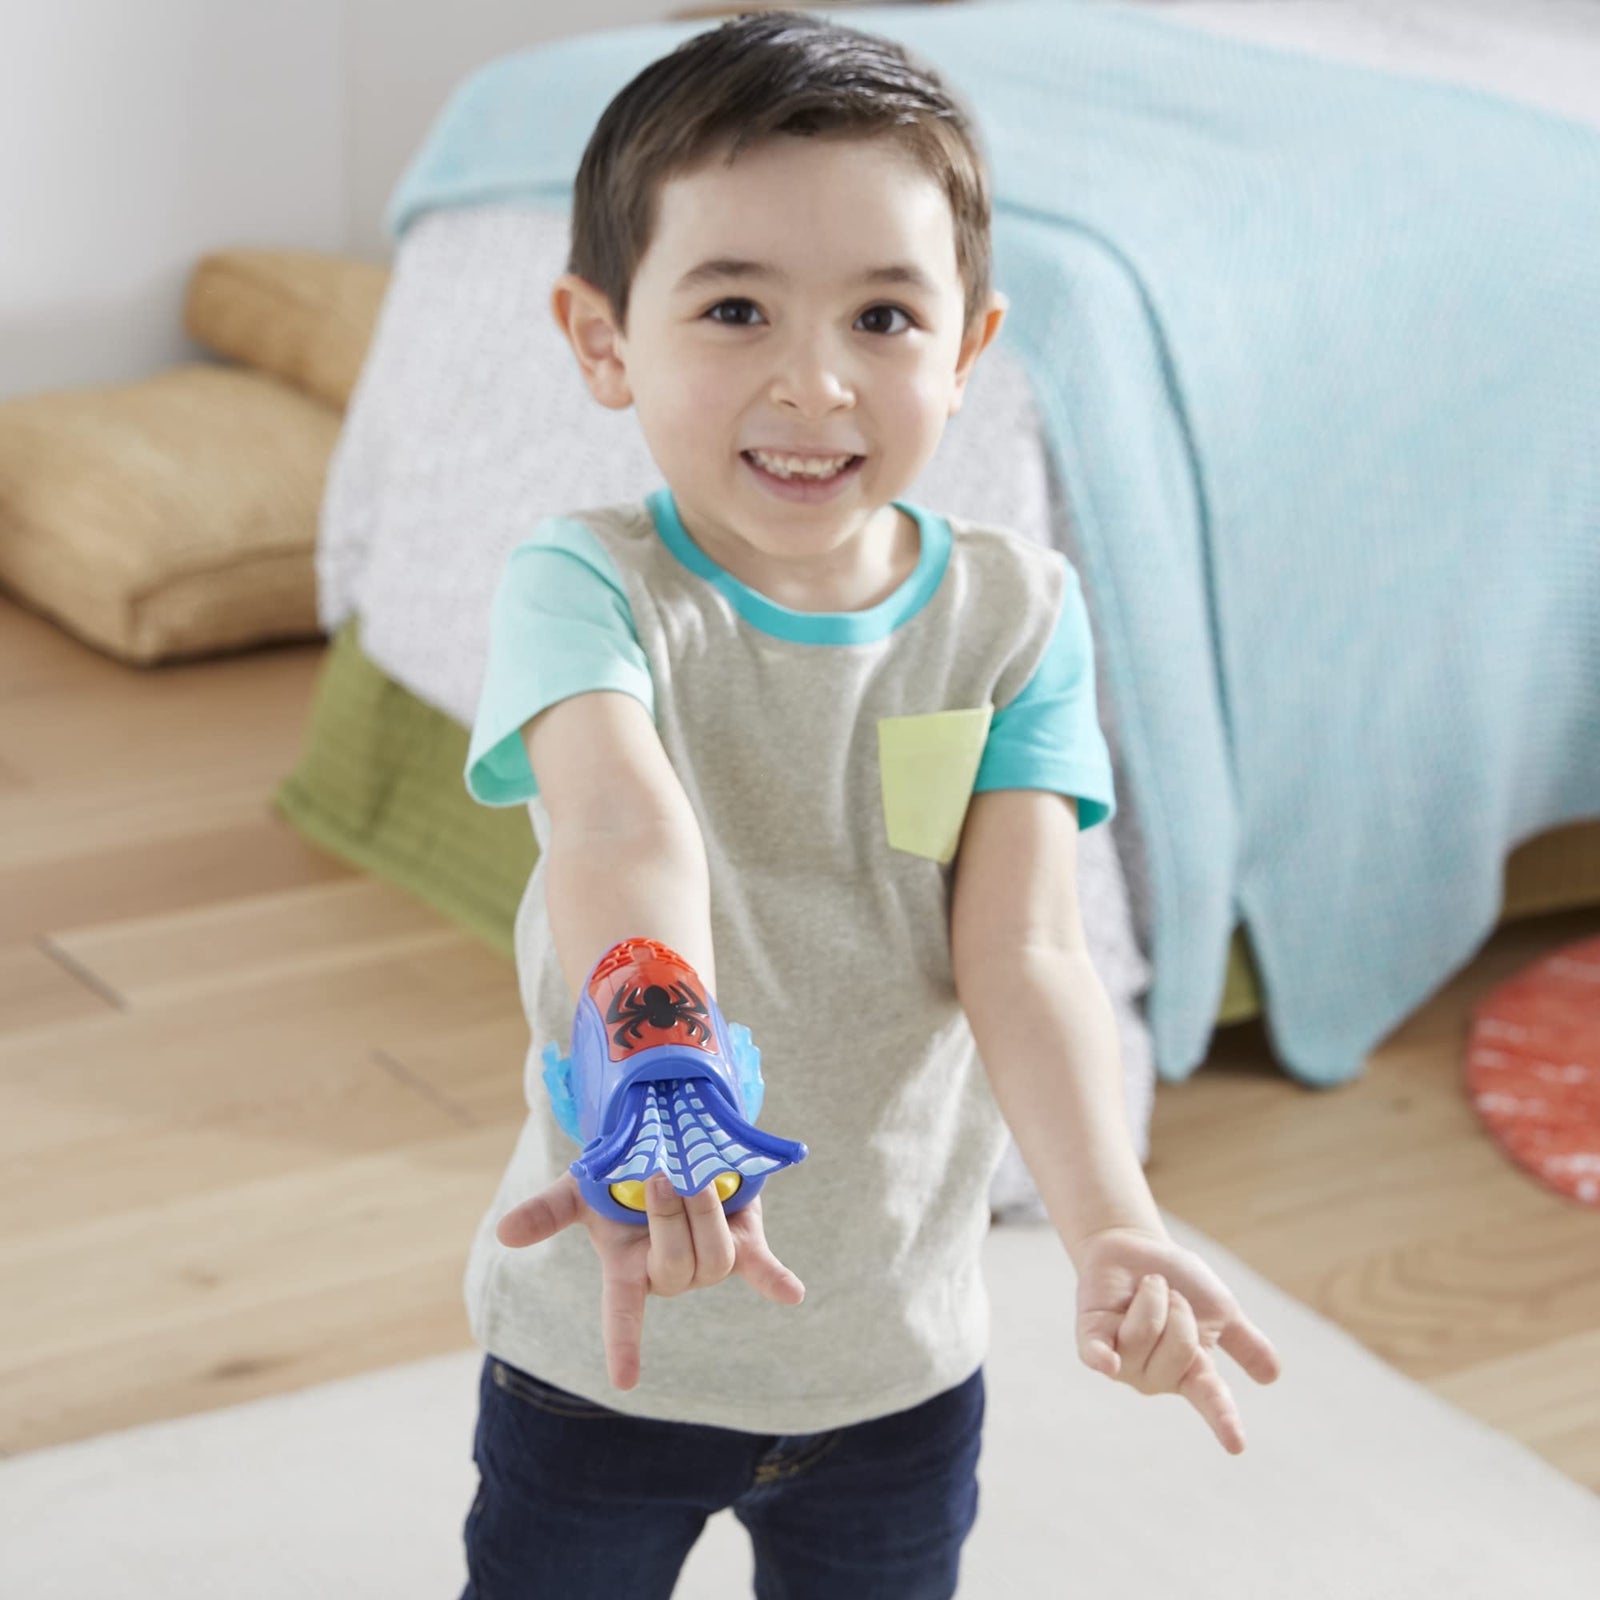 Marvel Spidey and His Amazing Friends Spidey Web Slinger, Role Play Toy, Fabric Web Extends and Retracts, Easy to Use, Ages 3 and Up, Frustration Free Packaging